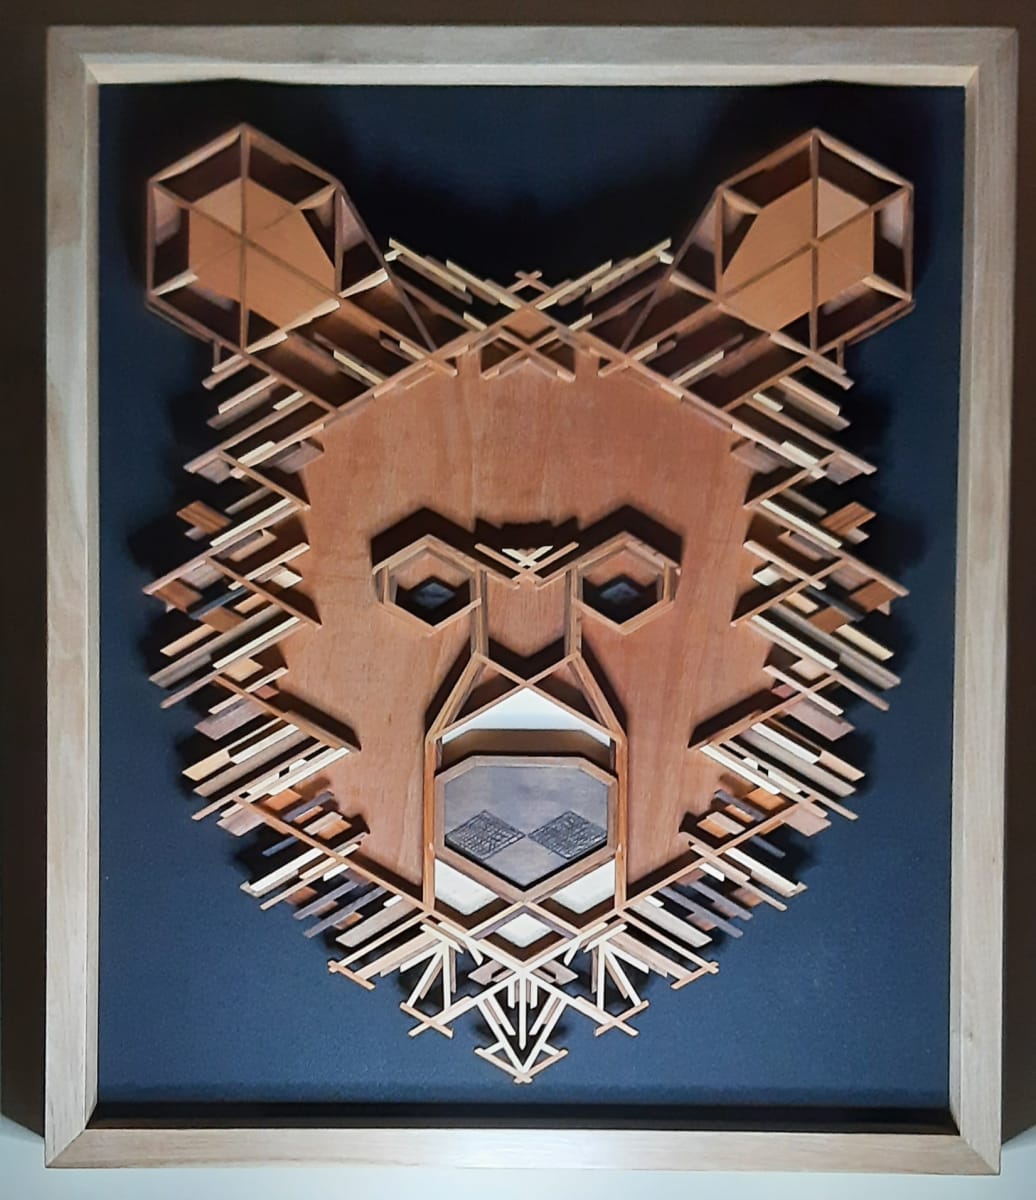 Grizz The Wiser by Robert E LeBlanc  Image: Grizz is king of the mountain. Framed in repurposed oak, with a cloth background.